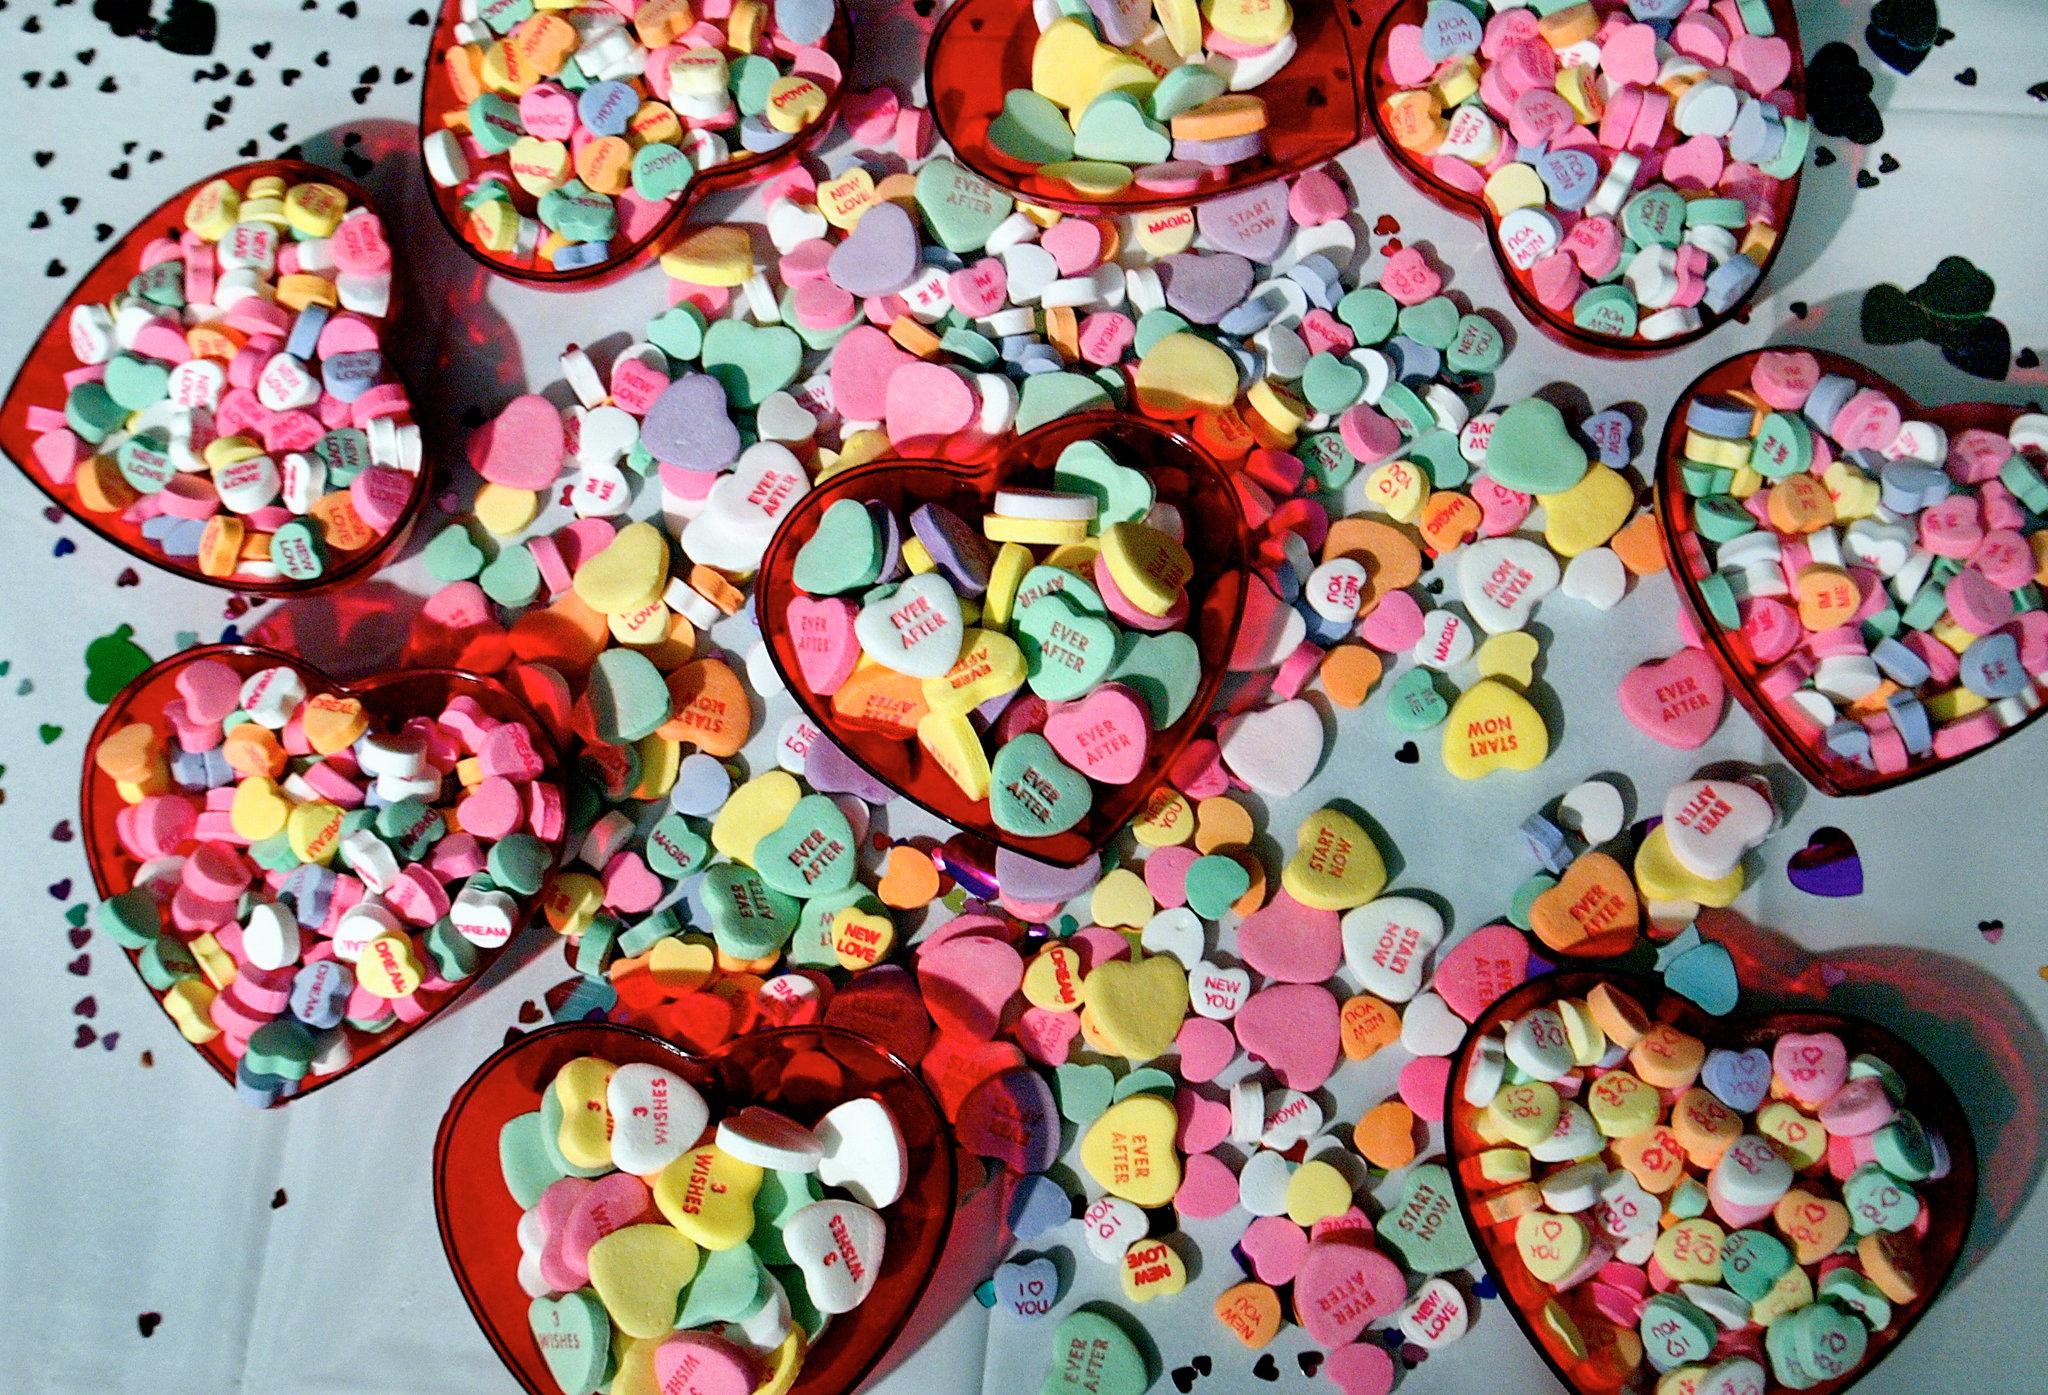 Sweethearts Candy .nytimes.com